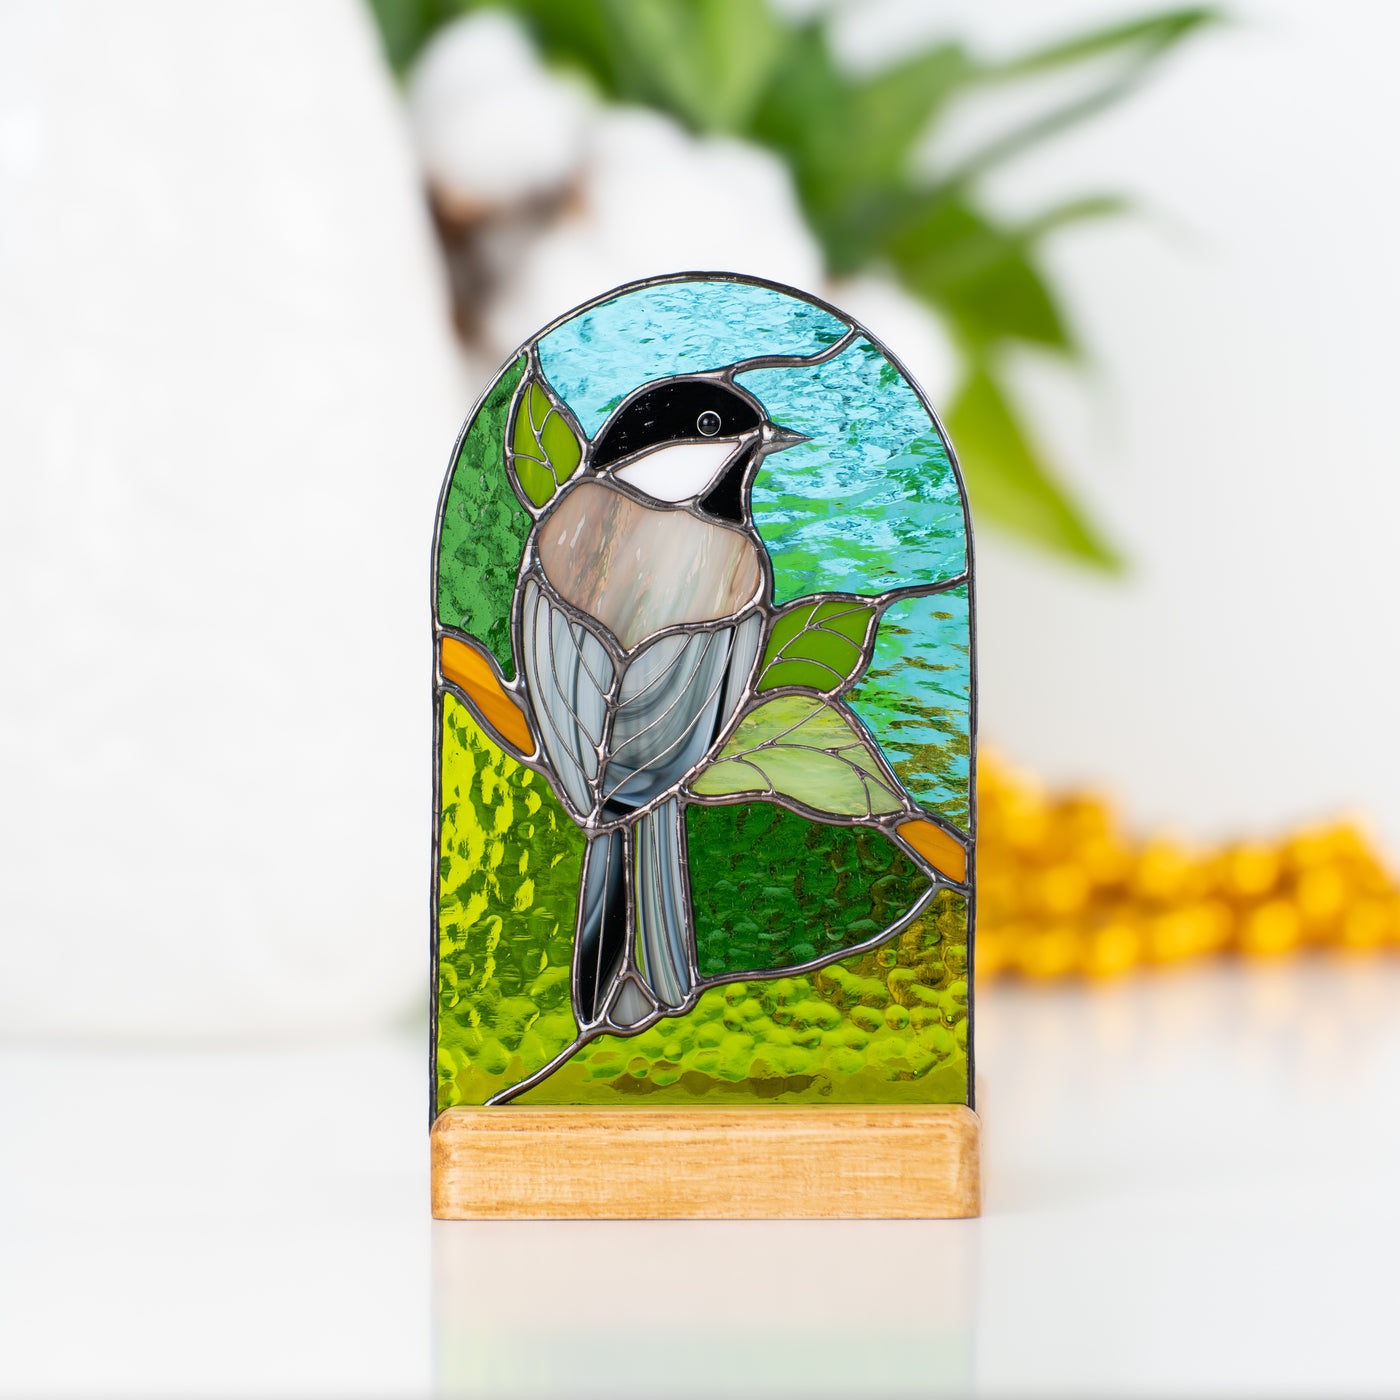 Chickadee panel of stained glass in a wooden base